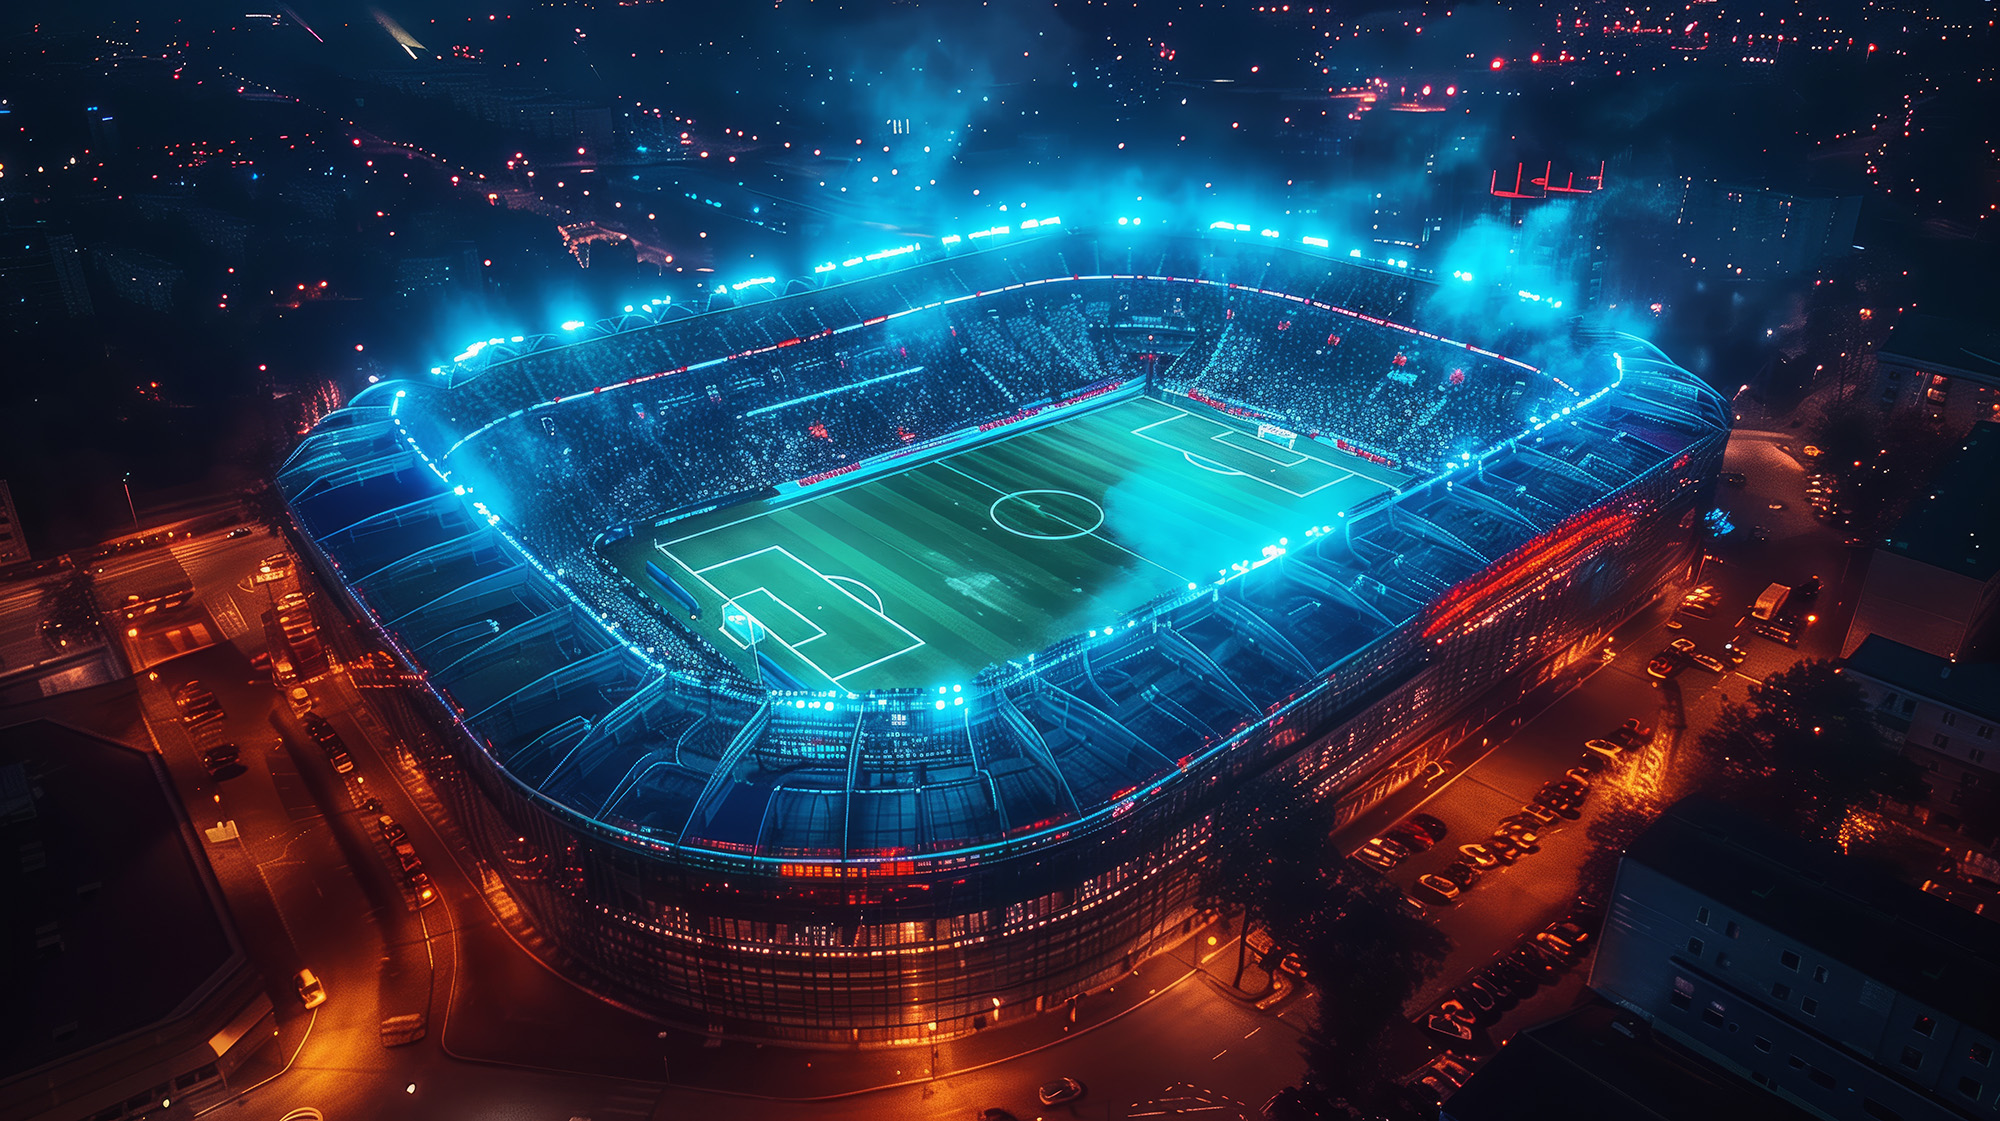 An aerial view of a smart sports stadium at night, lit up with bright lights